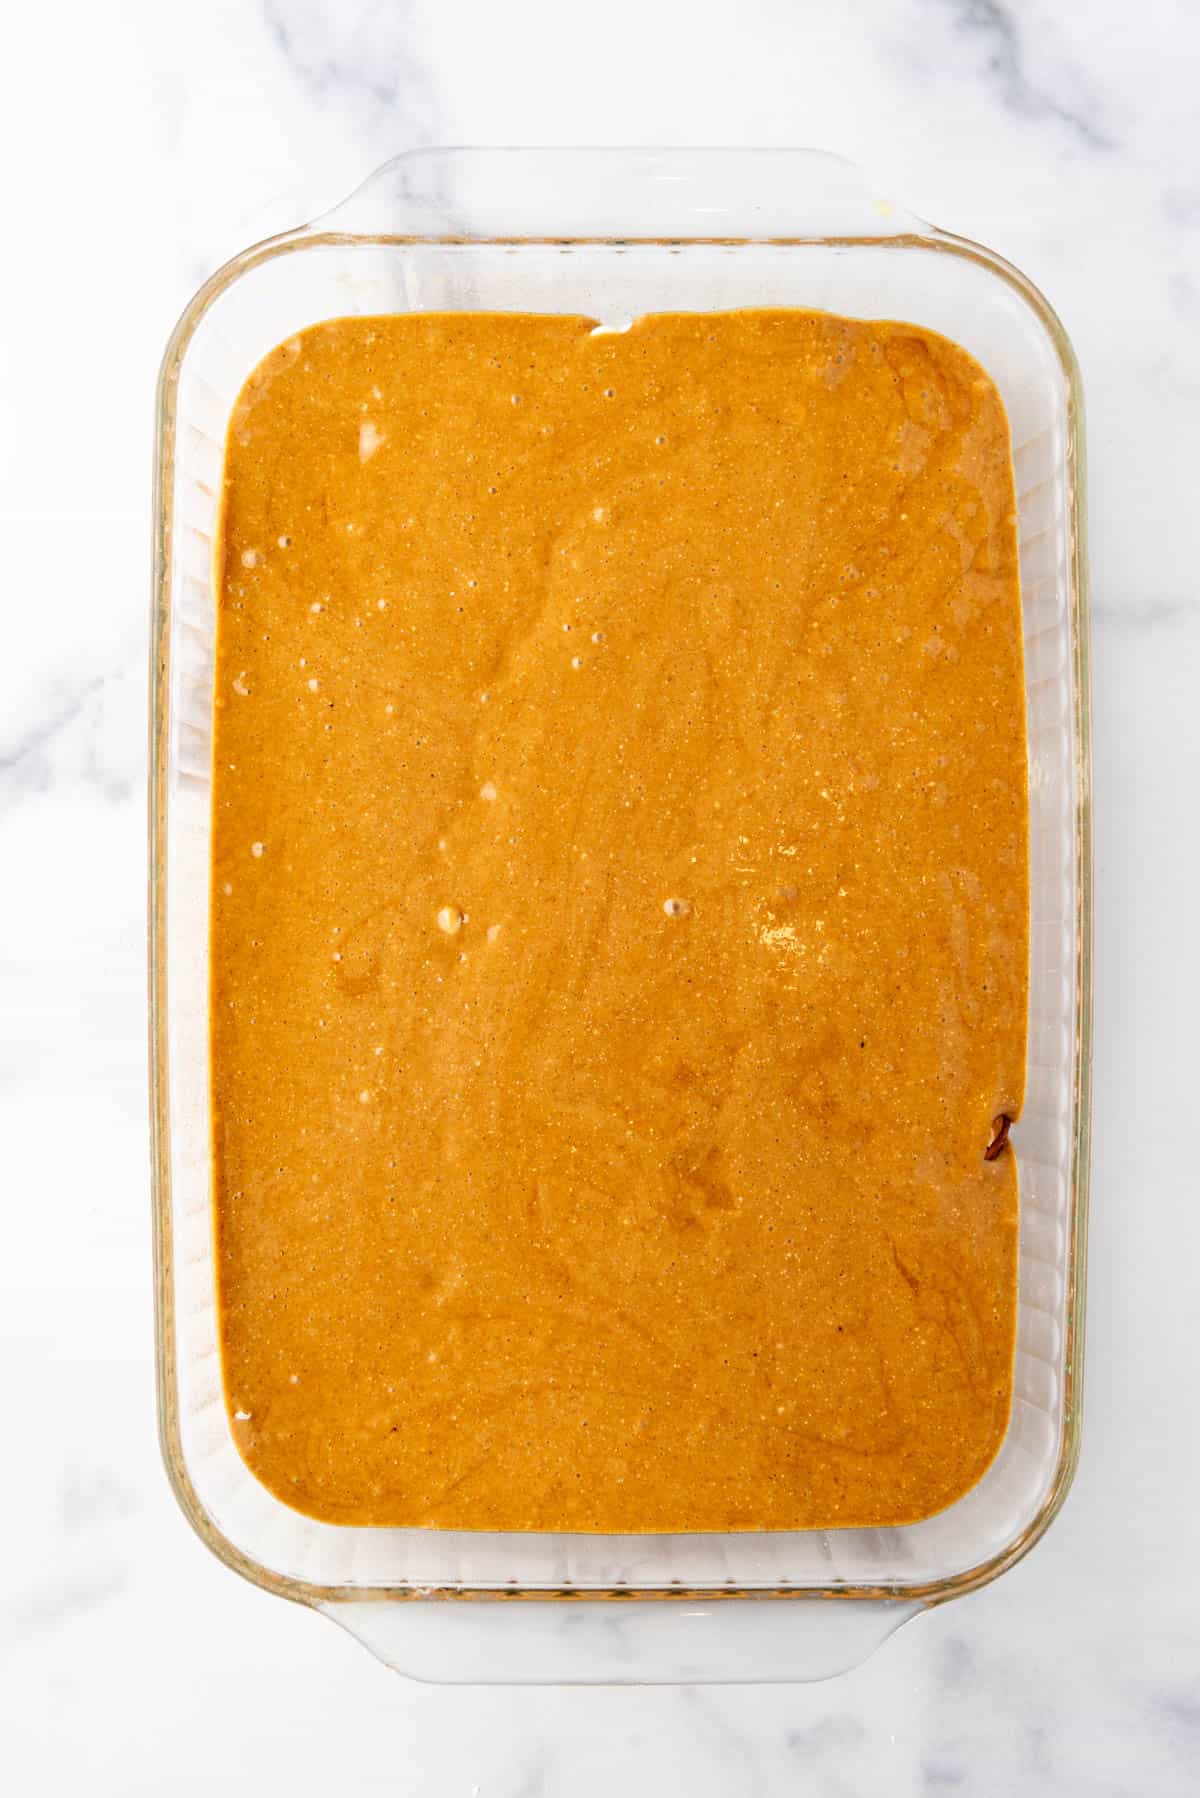 Gingerbread cake batter in a glass baking dish.